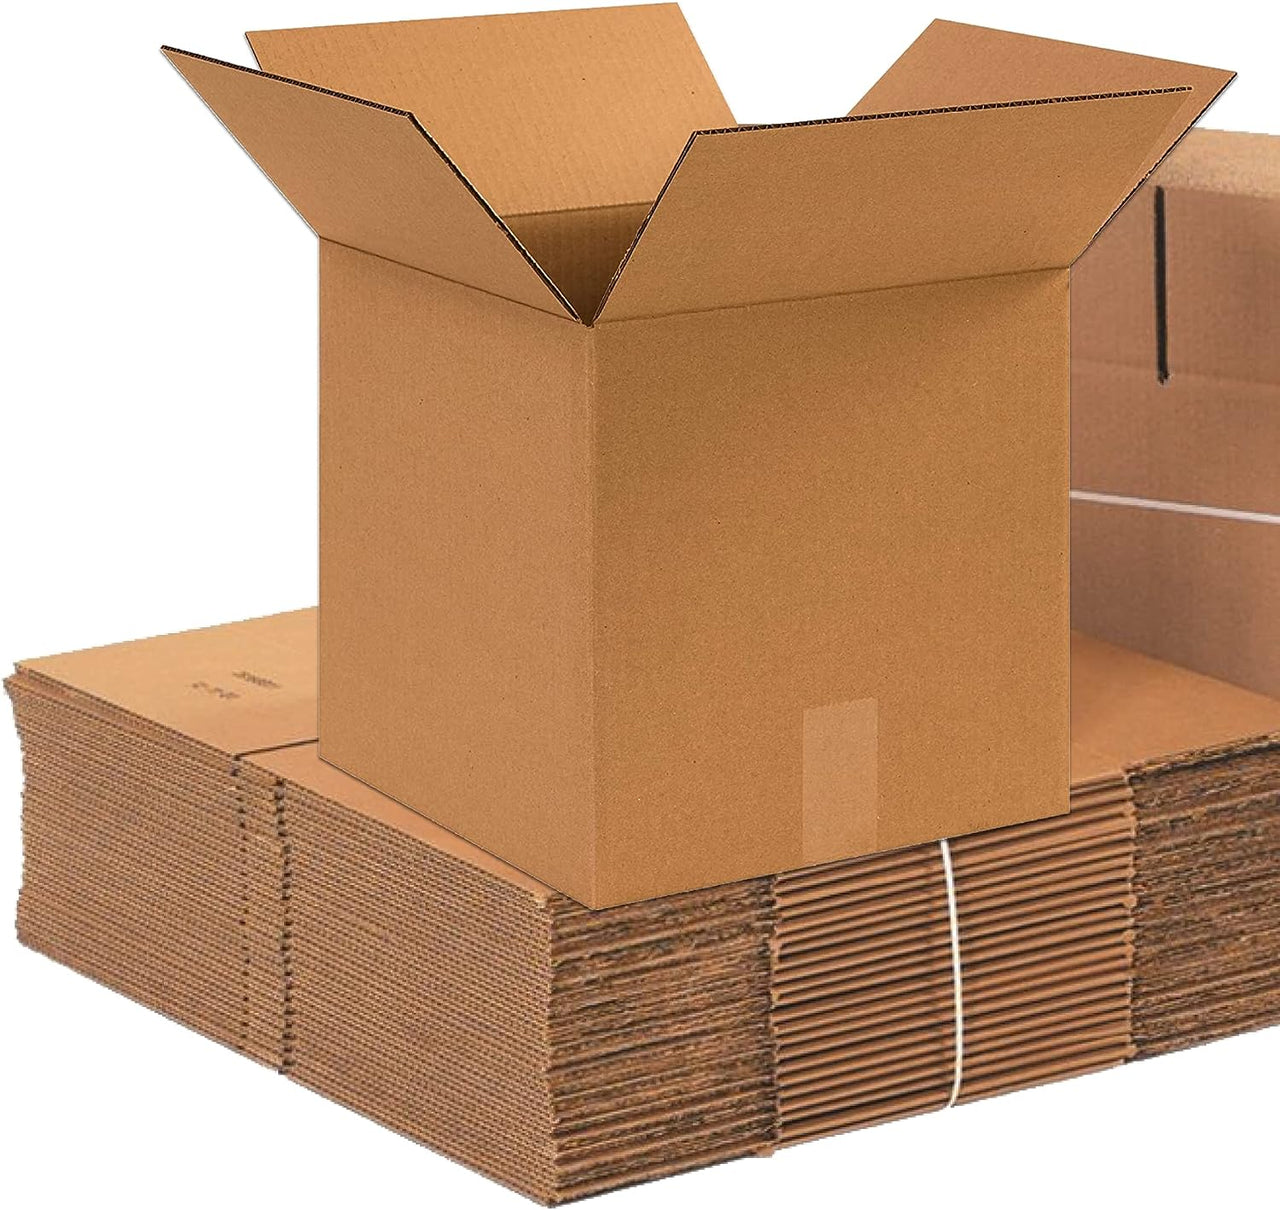 Shipping Boxes 12"L x 12"W x 12"H 25-Pack Corrugated Cardboard Box for Packing Moving Storage